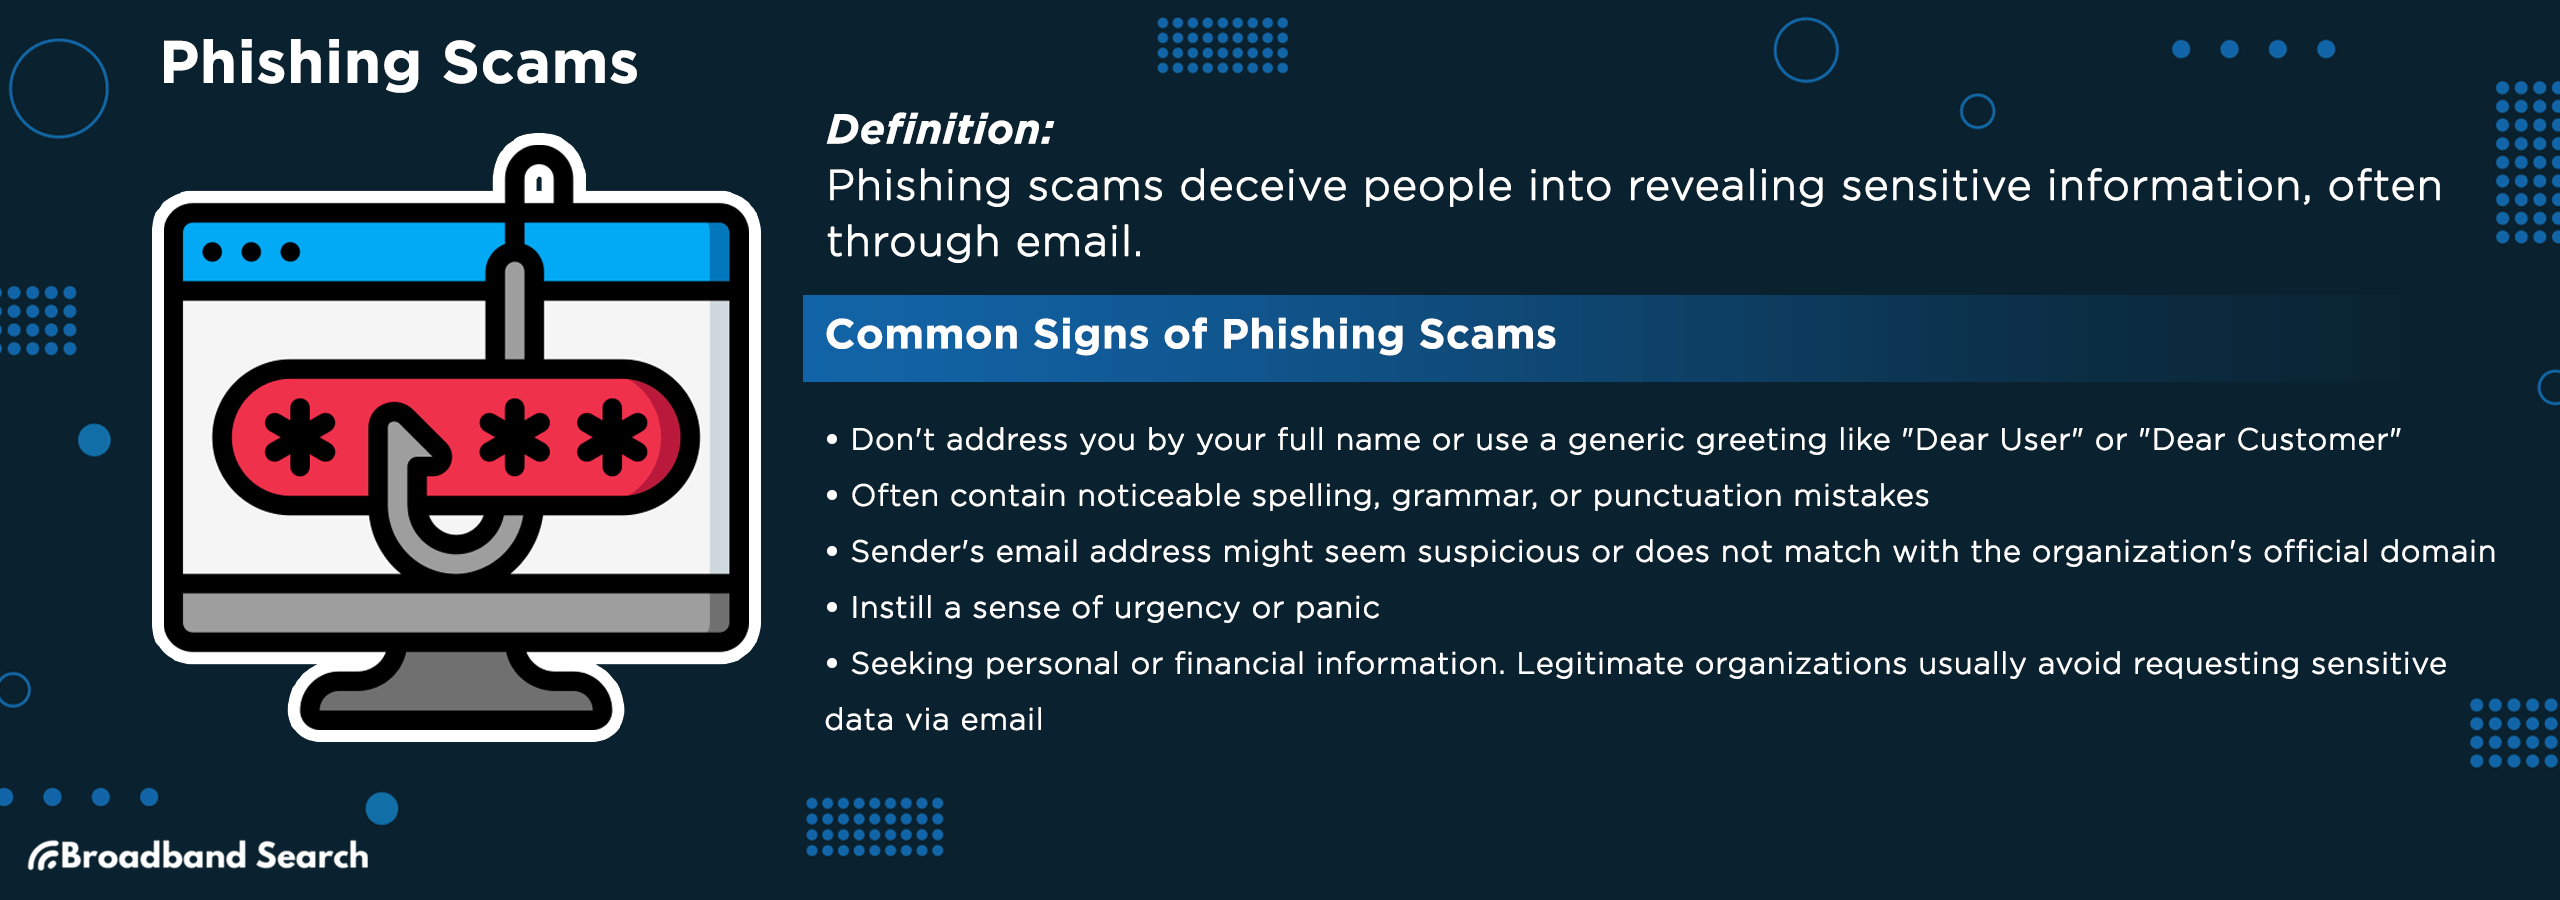 Definition and signs of phising scams